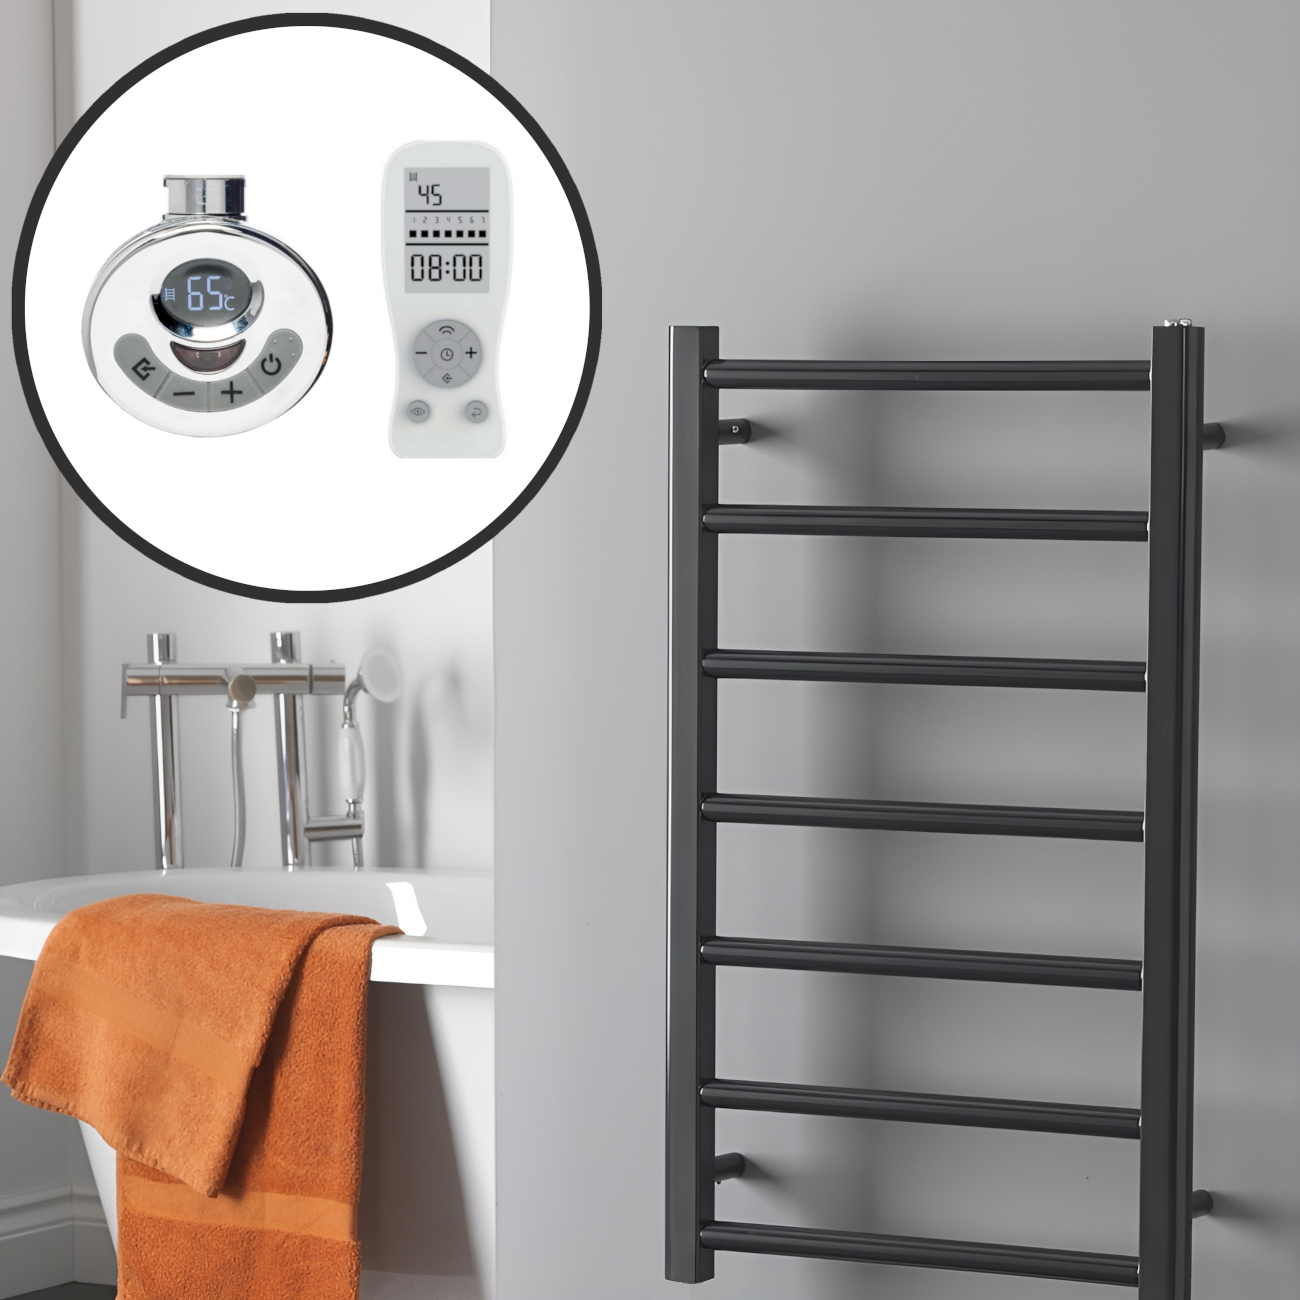 Alpine Anthracite Heated Towel Rail / Warmer – Electric + Thermostat, Timer Best Quality & Price, Energy Saving / Economic To Run Buy Online From Adax SolAire UK Shop